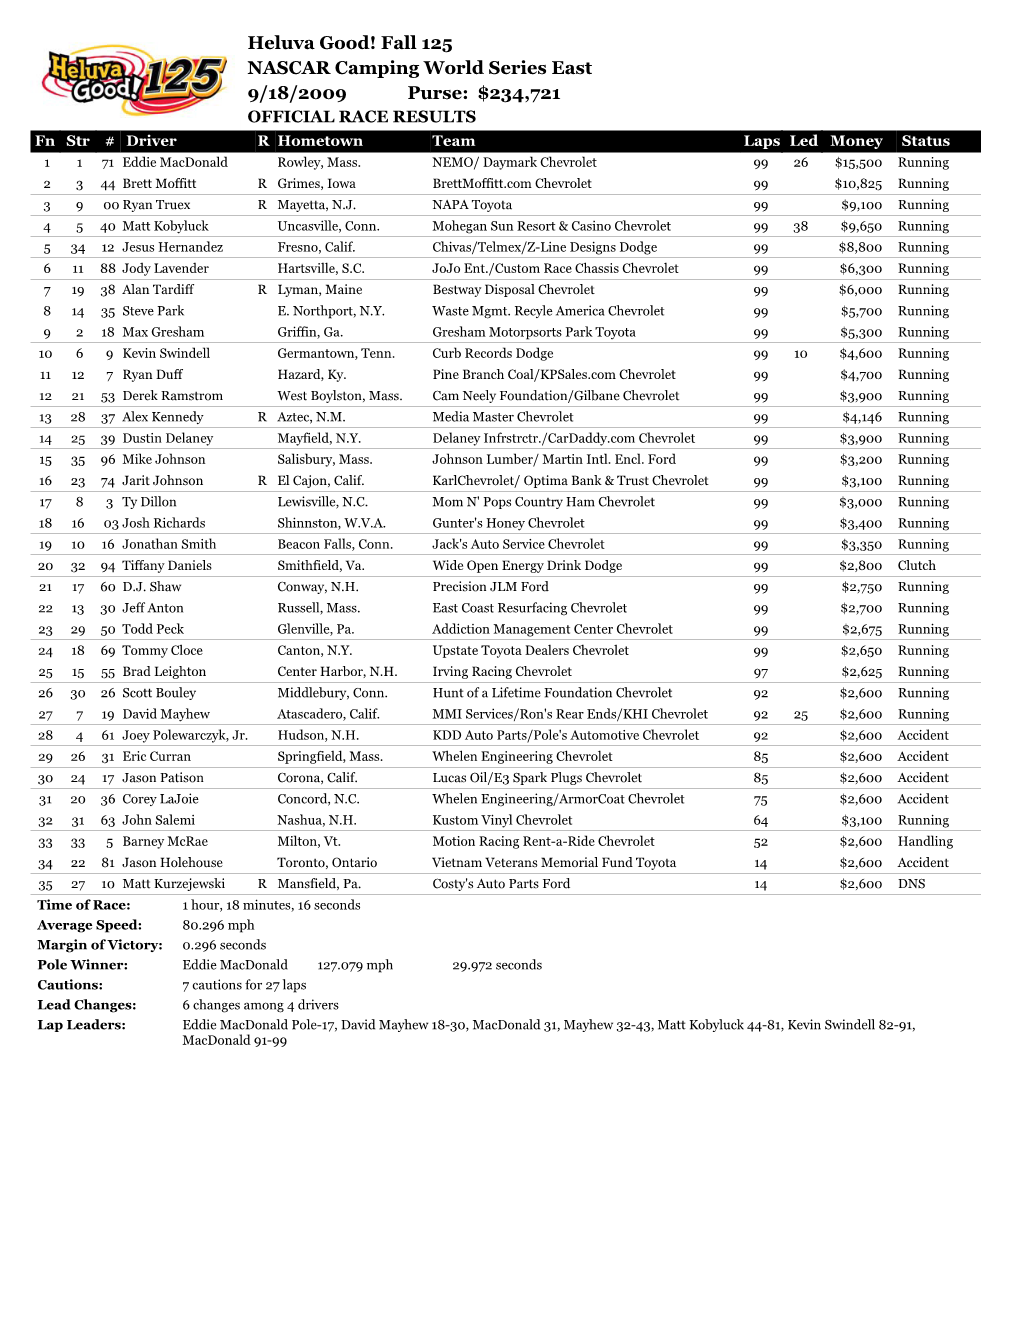 NCWSE Race Results